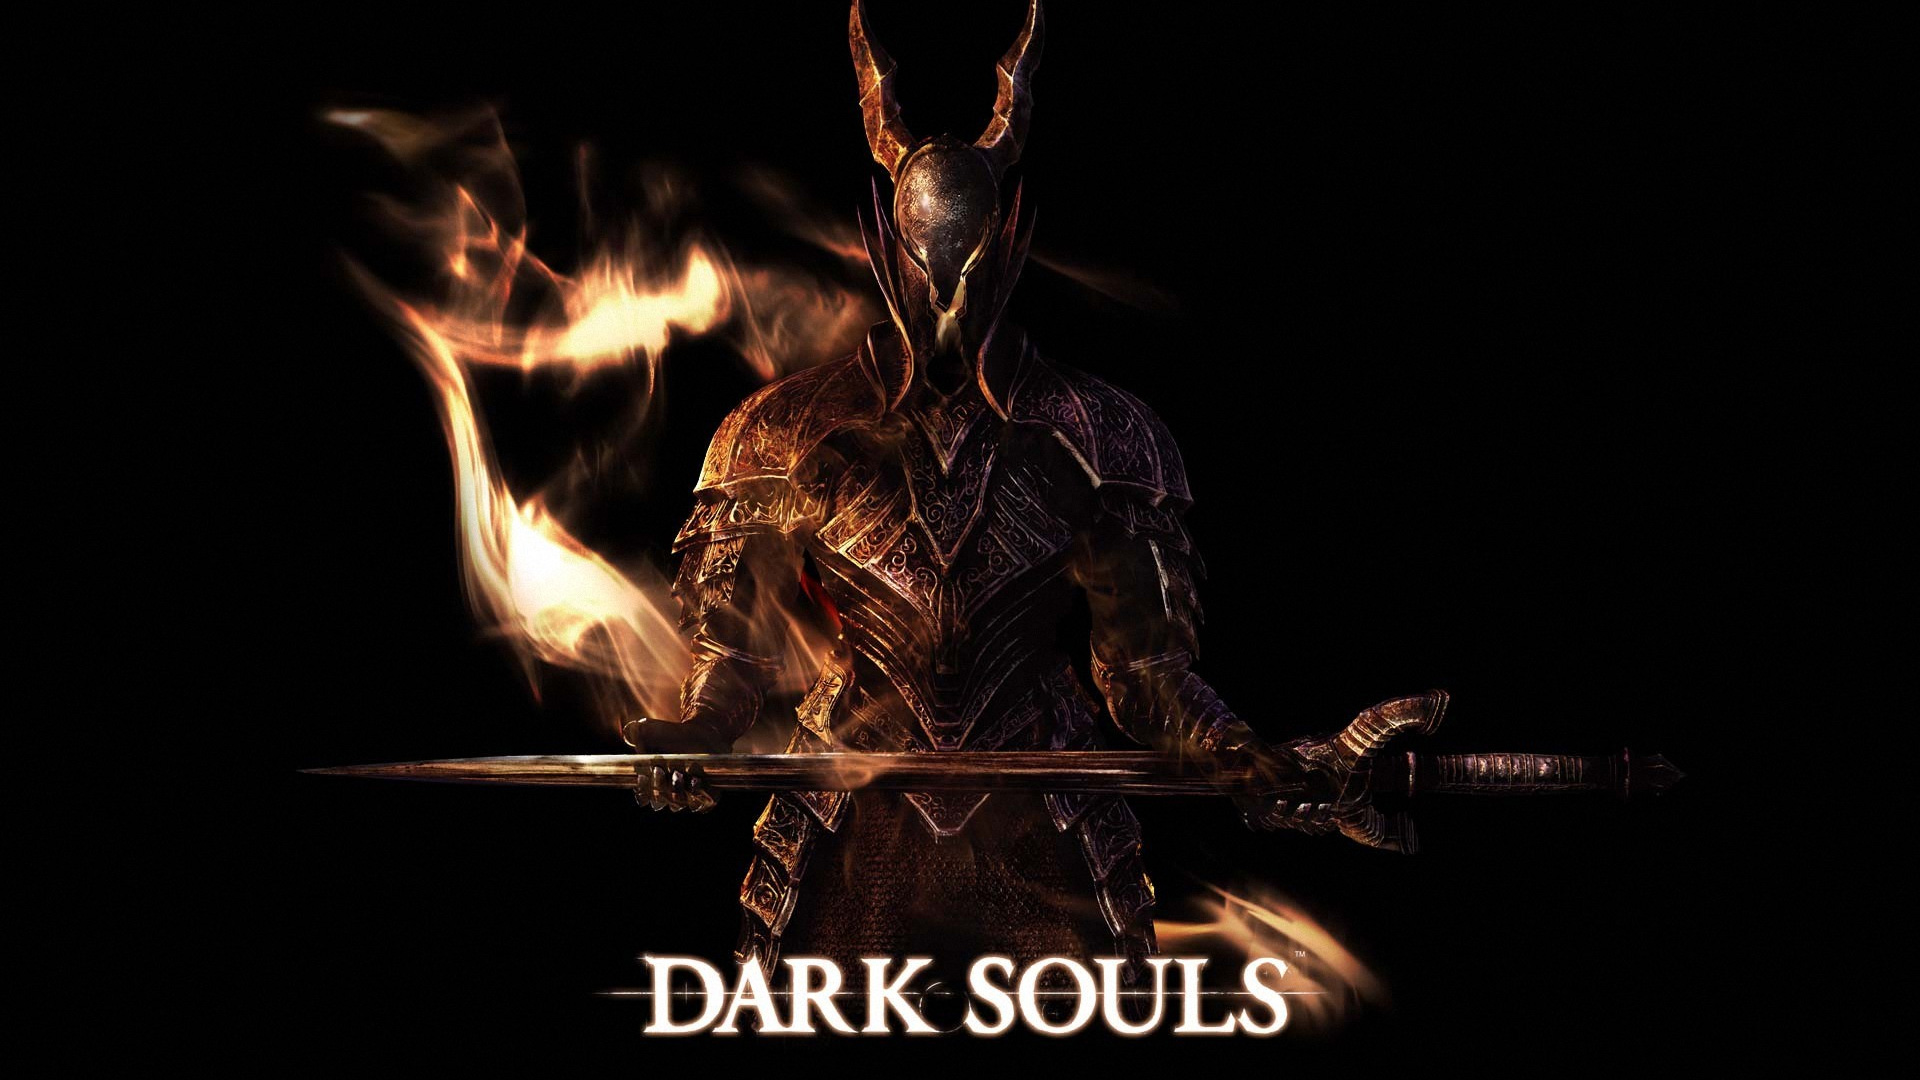 Dark Souls Wallpapers in HD Page 4 1920x1080